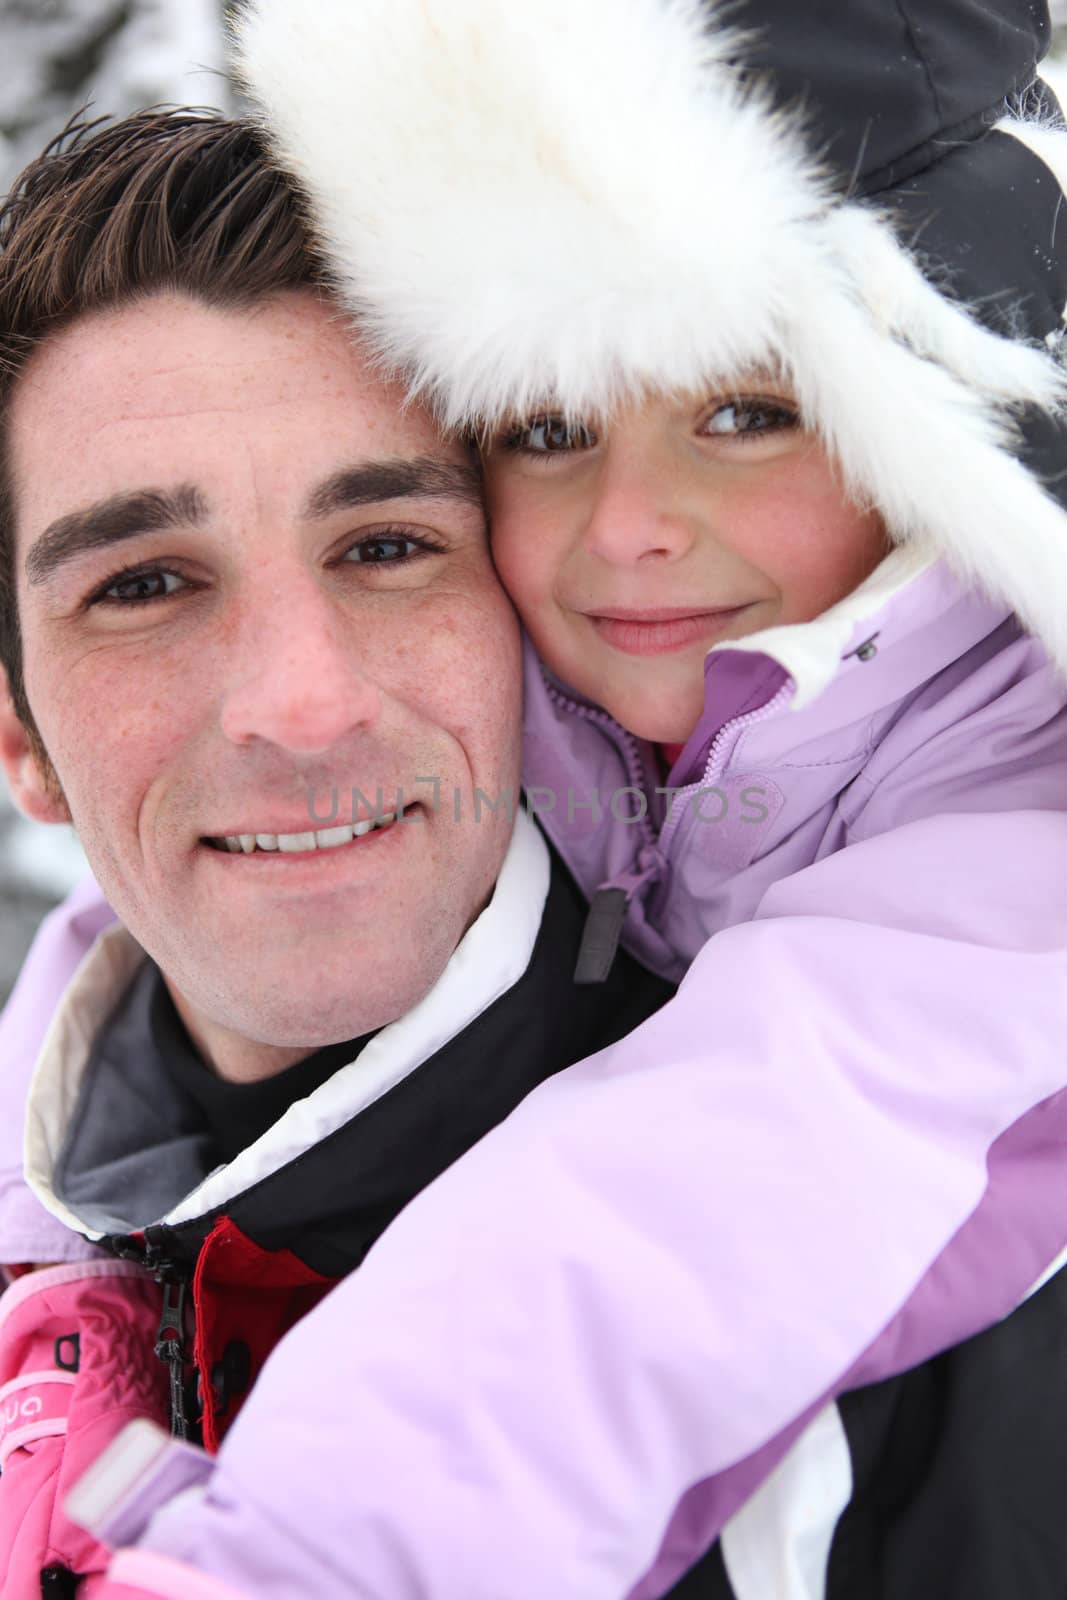 Young girl with her father on a winter's day